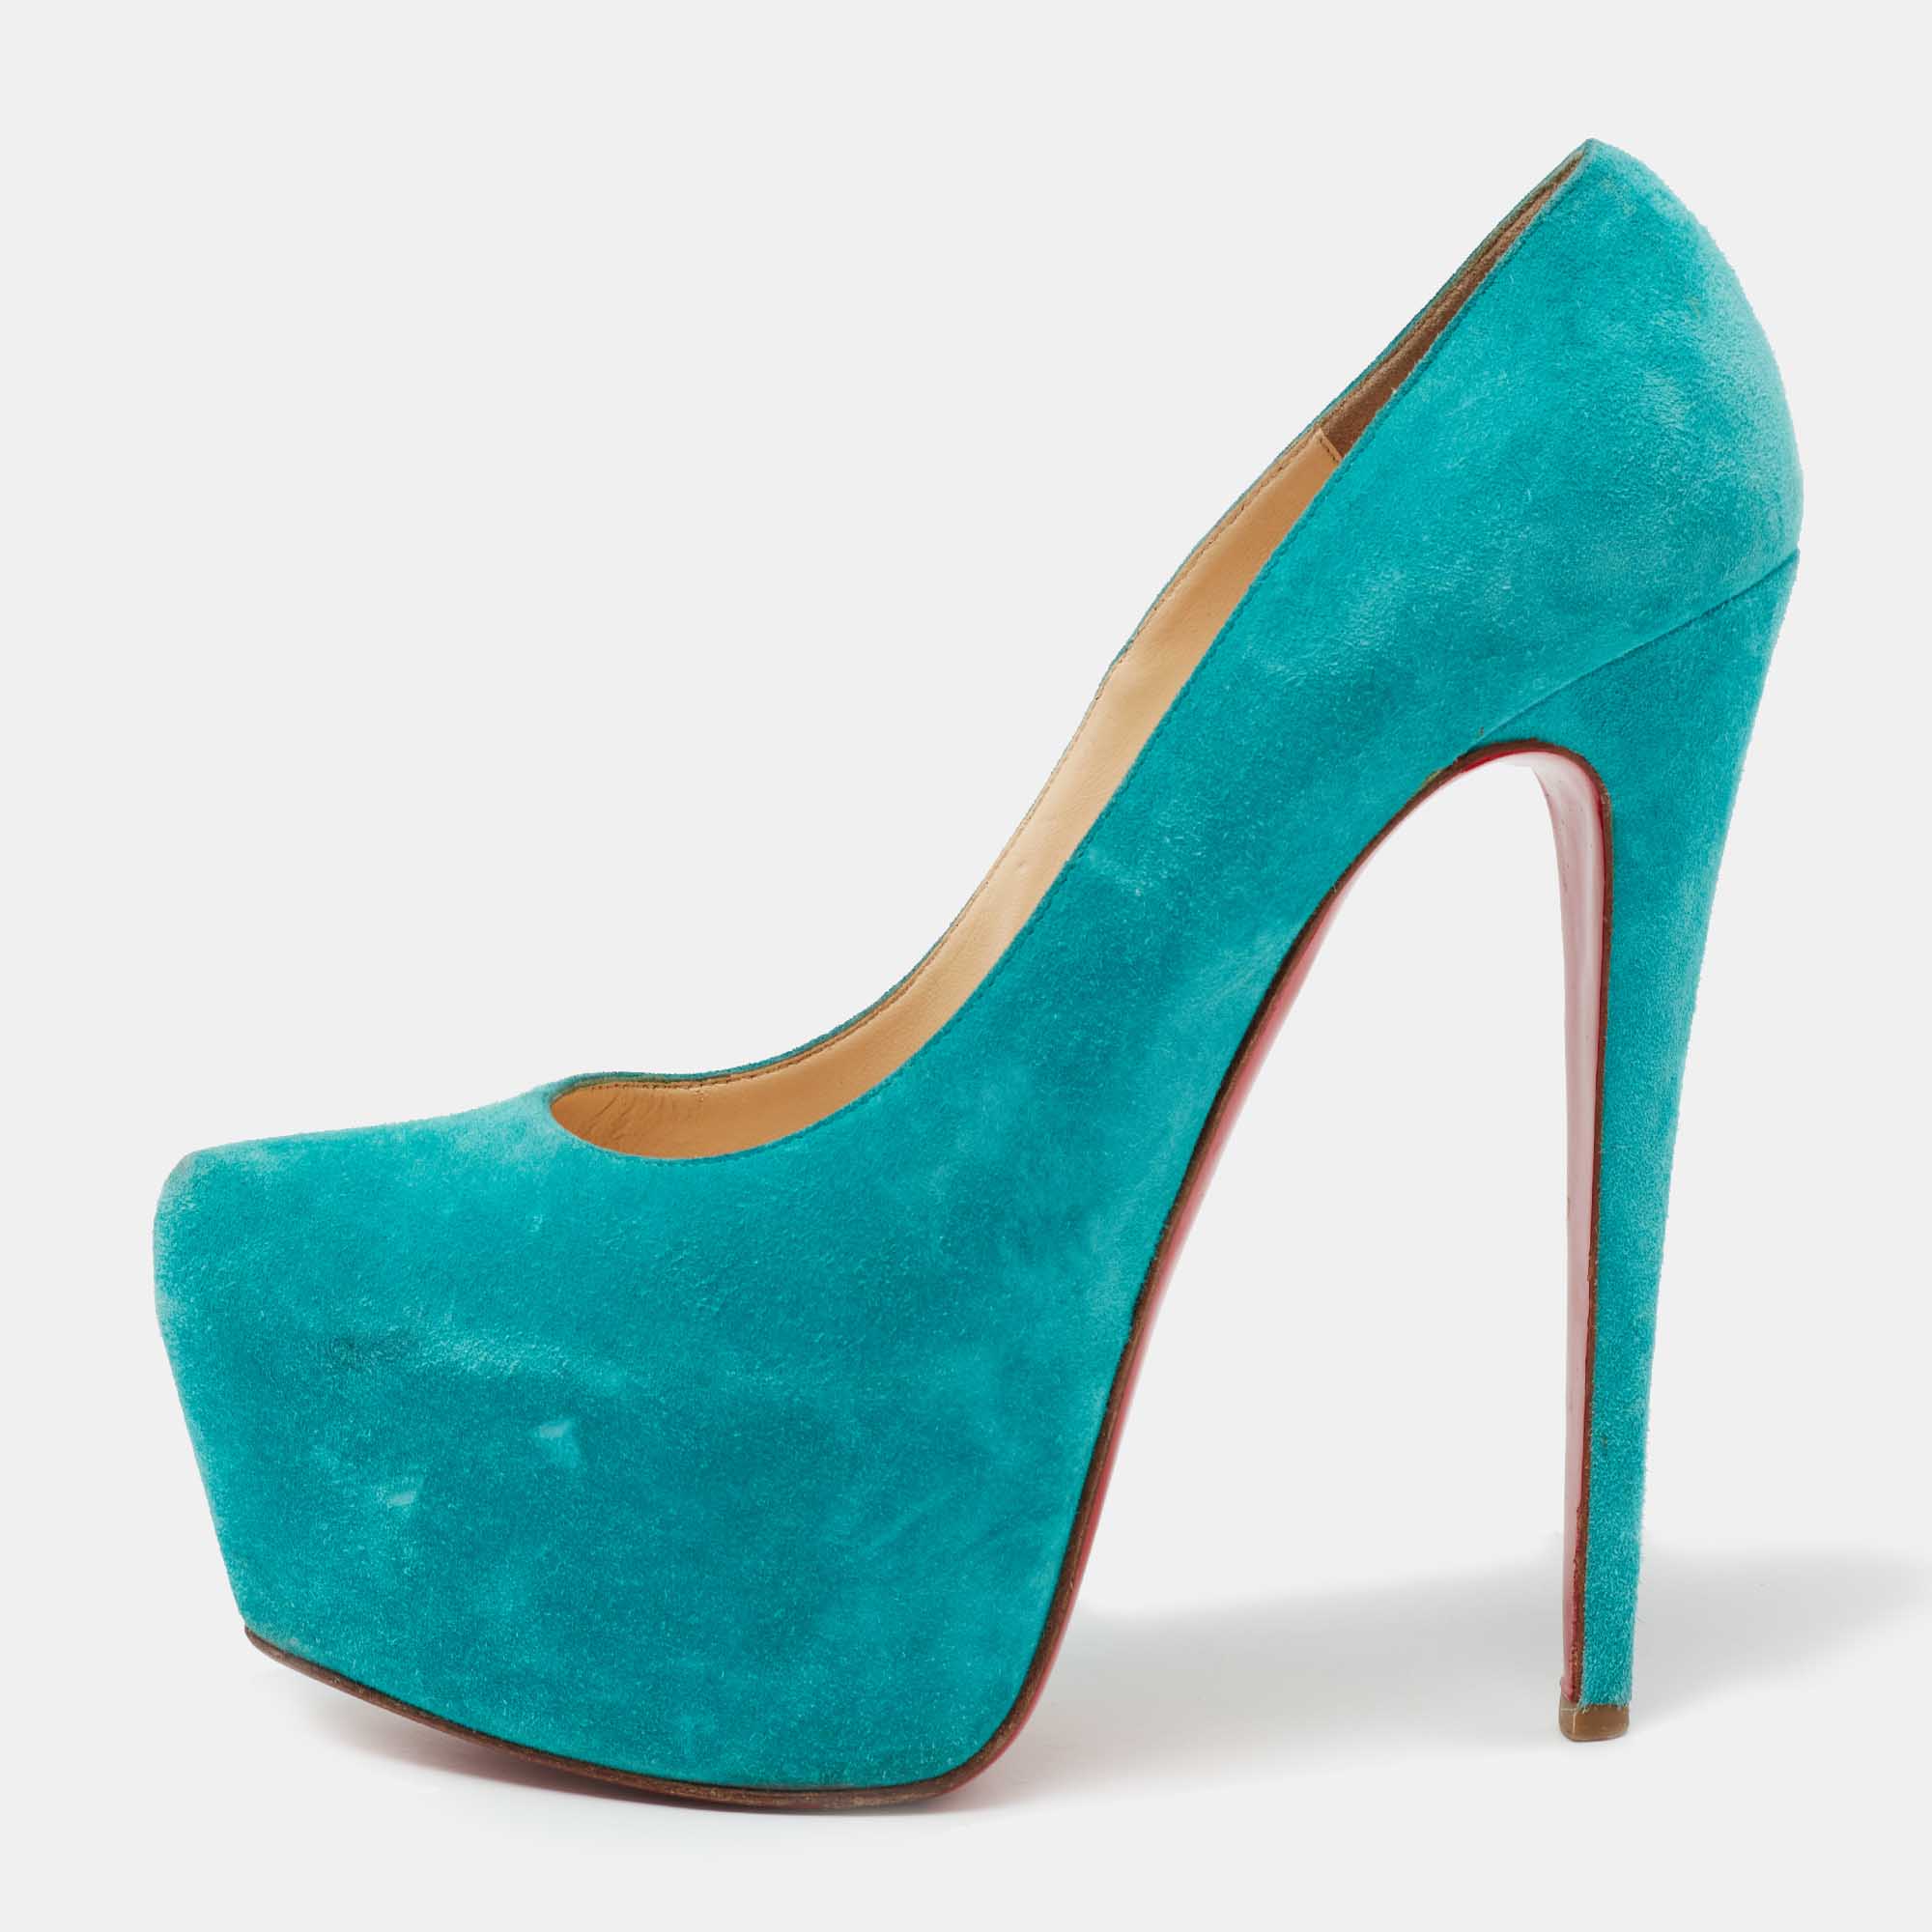 Take your love for Louboutins to new heights by adding this gorgeous pair to your collection. The turquoise blue pumps simply speak high fashion in every stitch and curve. The exteriors come made from suede and the pumps are finished with platforms towering heels and the famous red soles.